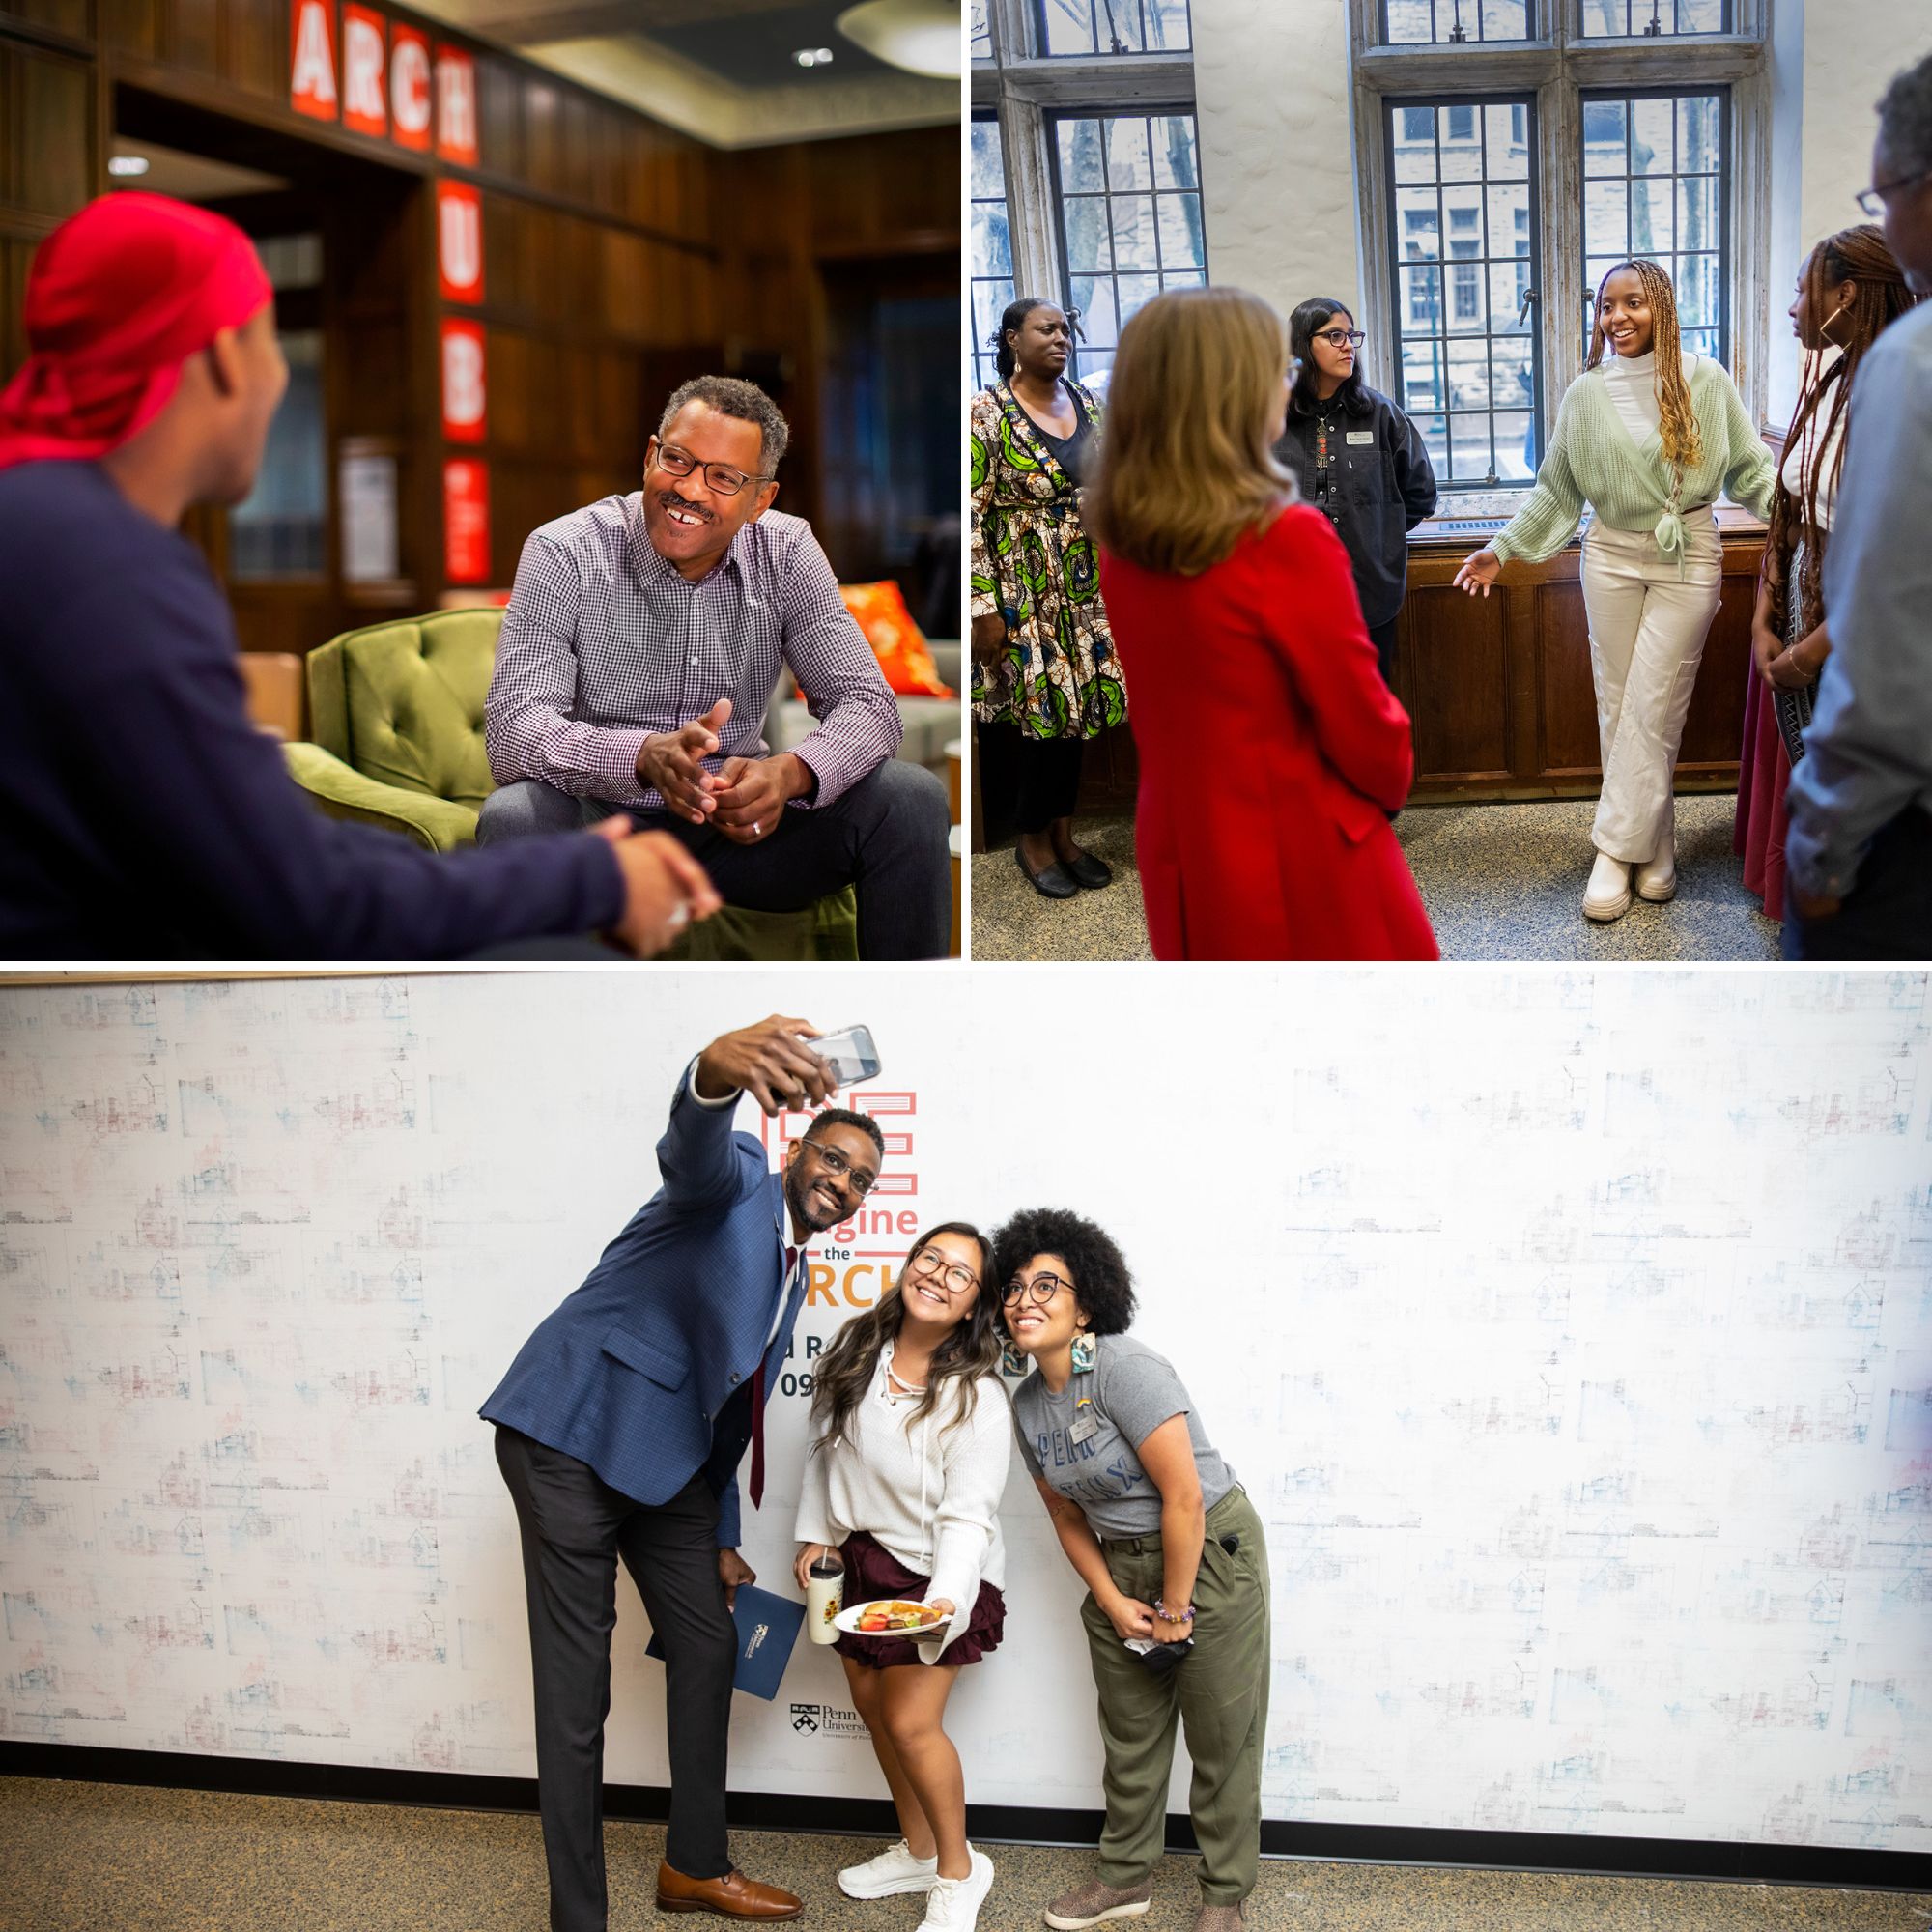 Top left, Brian Peterson, seated, talking with someone. Top right, Tarah Paul speaking with Penn president Liz Magill and four others in the ARCH building; bottom: Will Atkins takes a selfie with two others against the Reimagine the ARCH signing wall.